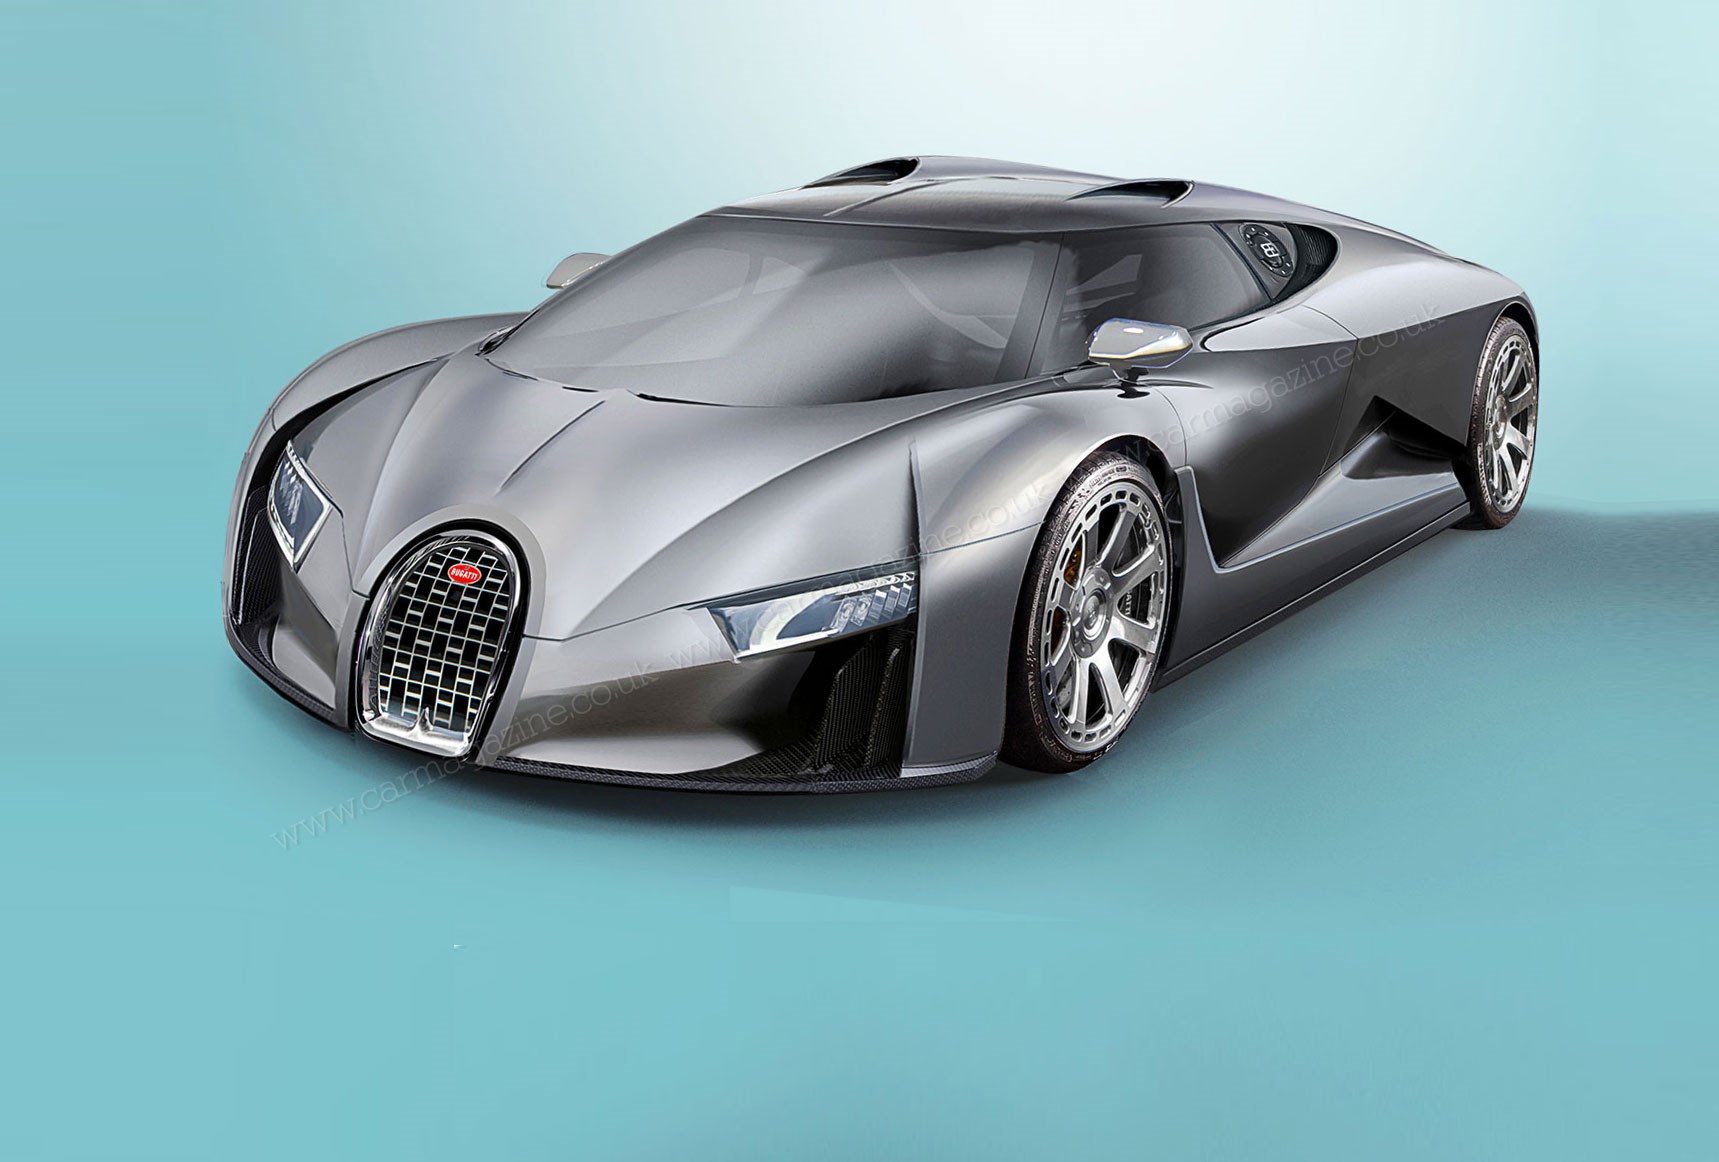 Bugatti could hit a top speed of 463